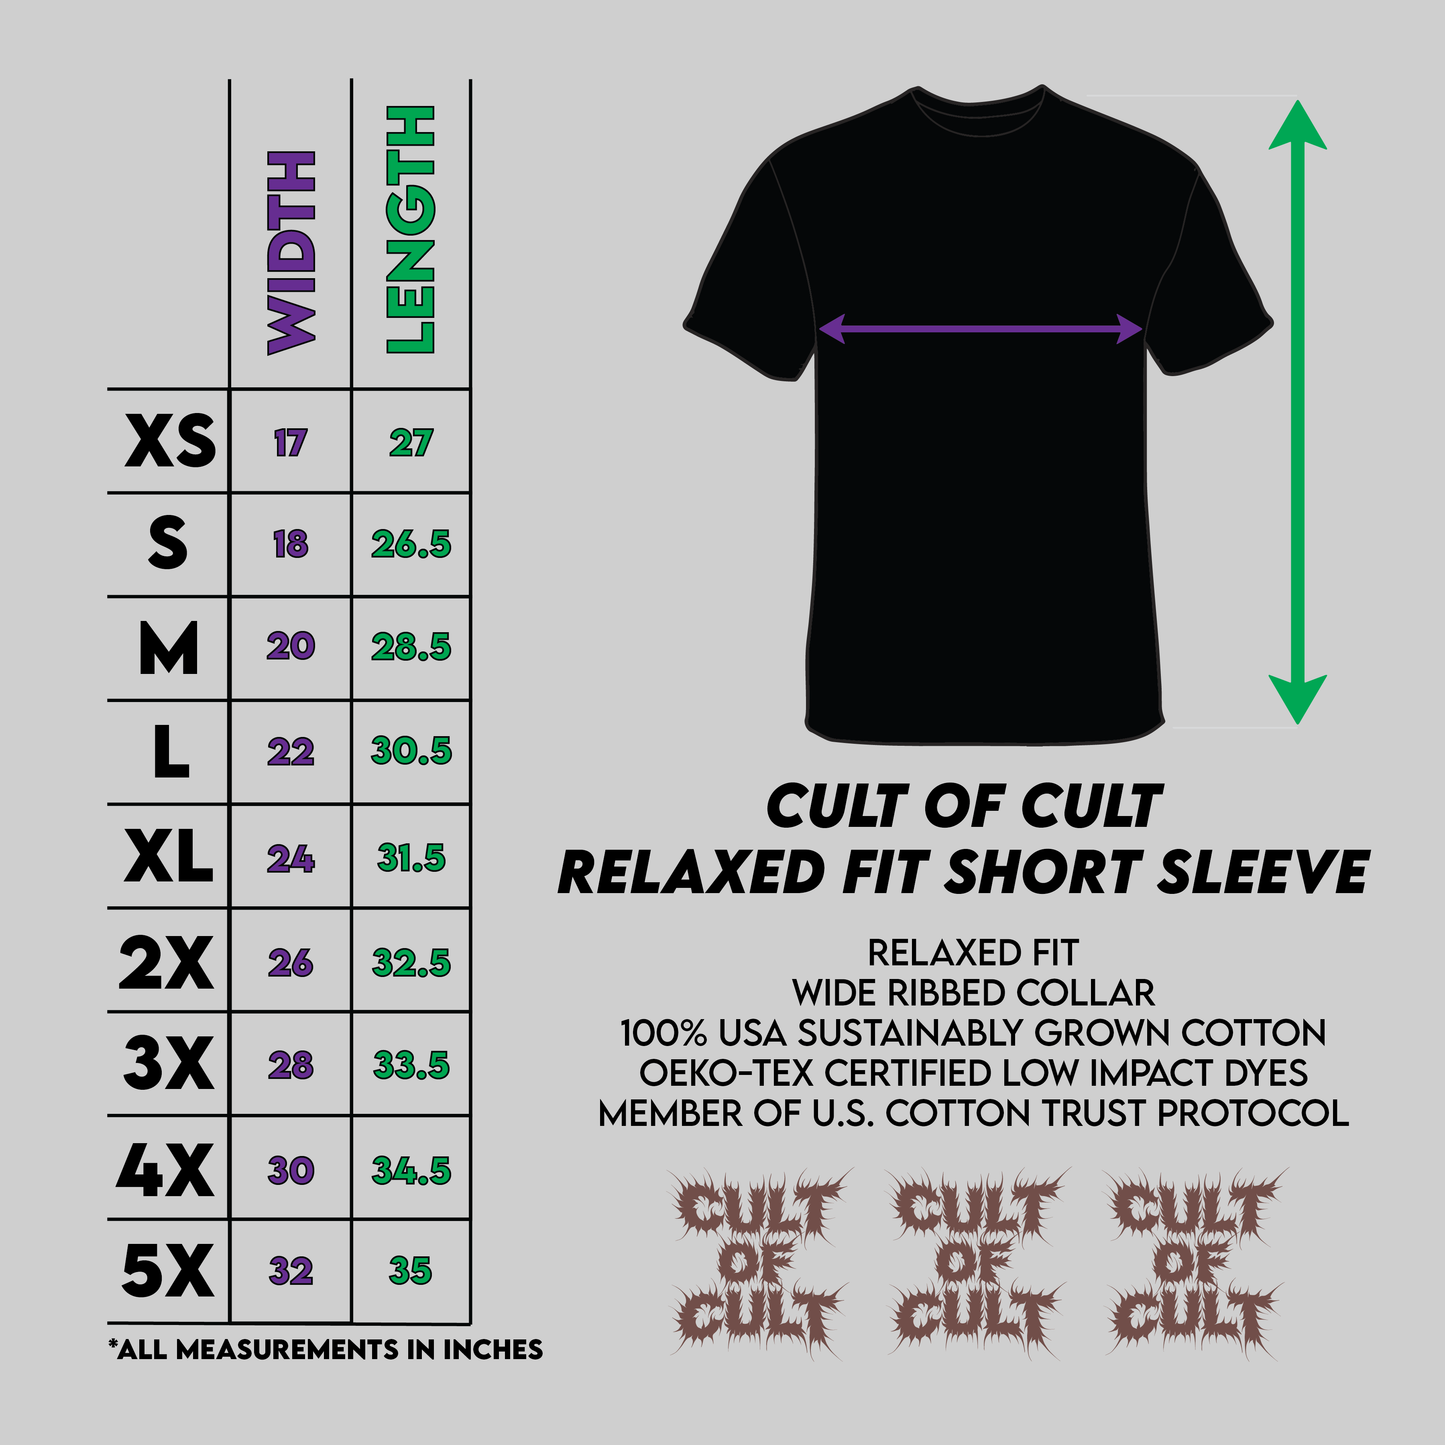 Cult of Cult sizing chart for T-Shirts